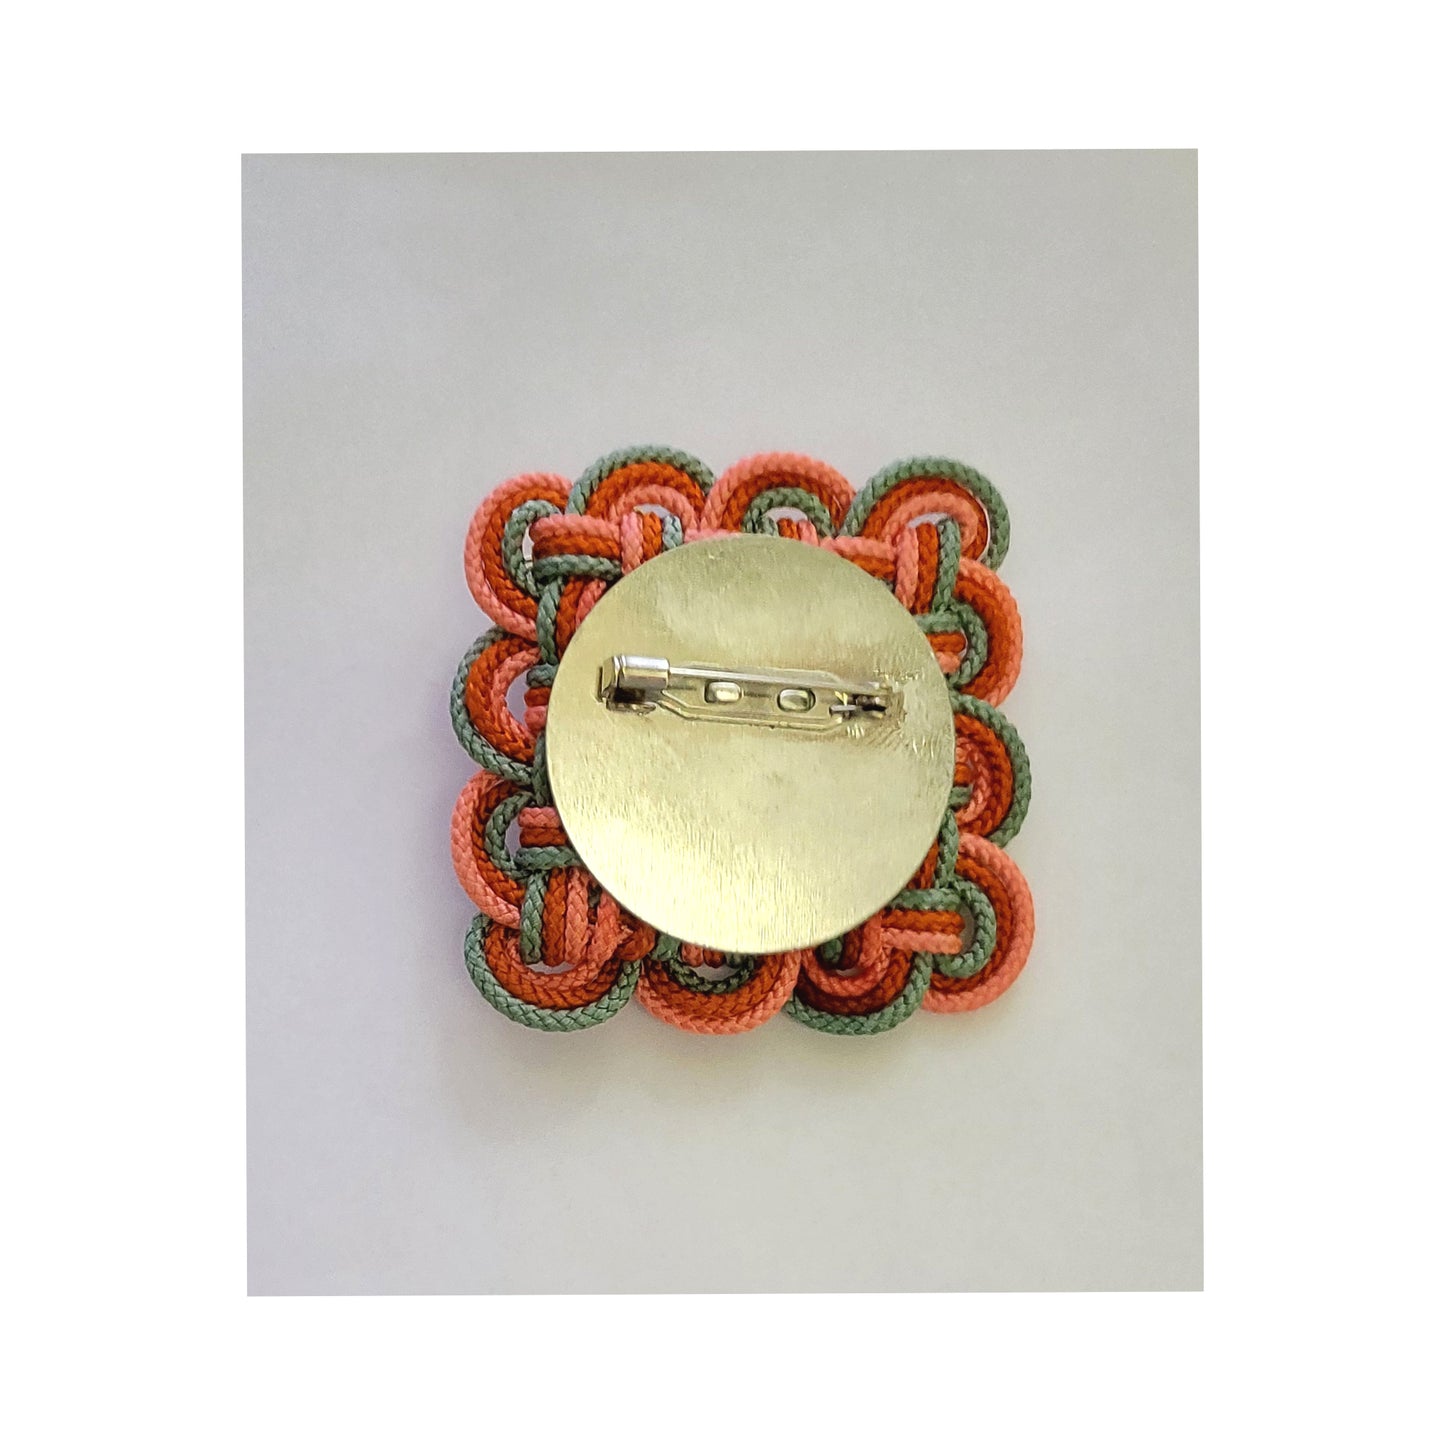 Handmade Brooch with Pearl and Flower-Shaped Decoration Using Korean Traditional Knot